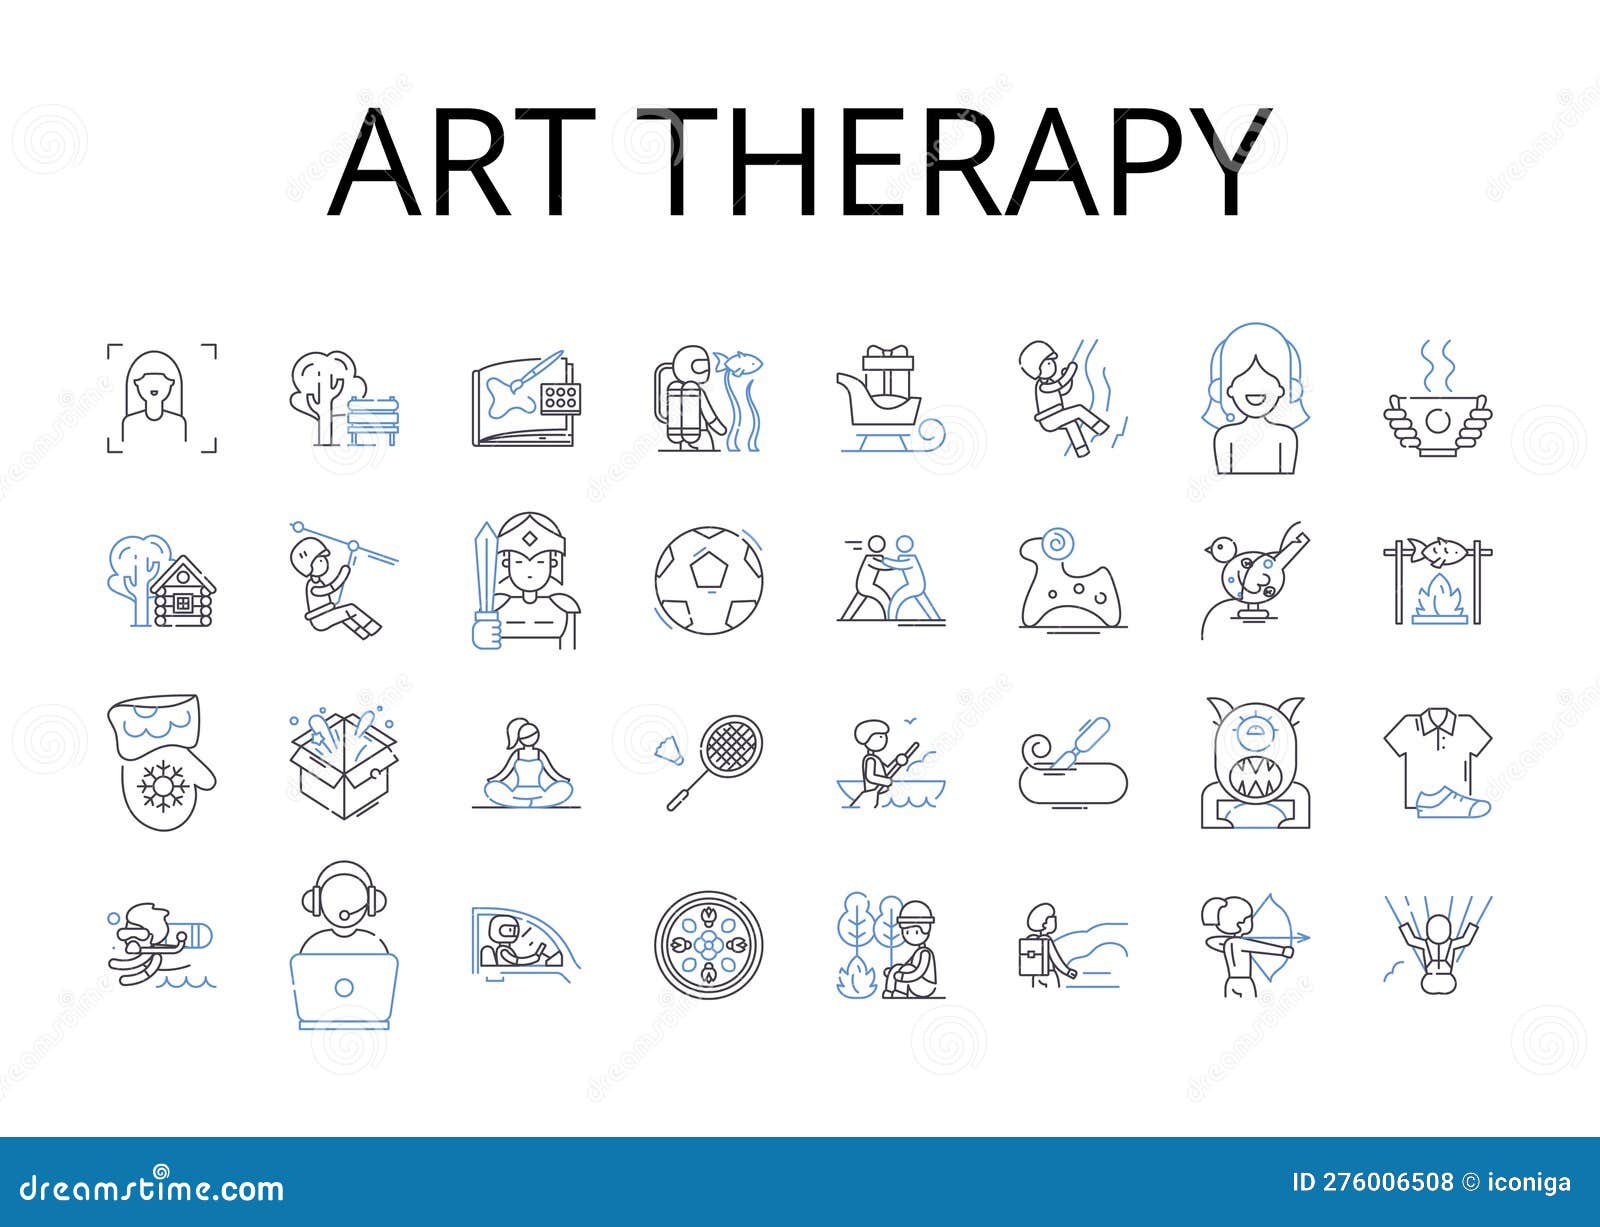 art therapy line icons collection. music therapy, play therapy, drama therapy, movement therapy, narrative therapy